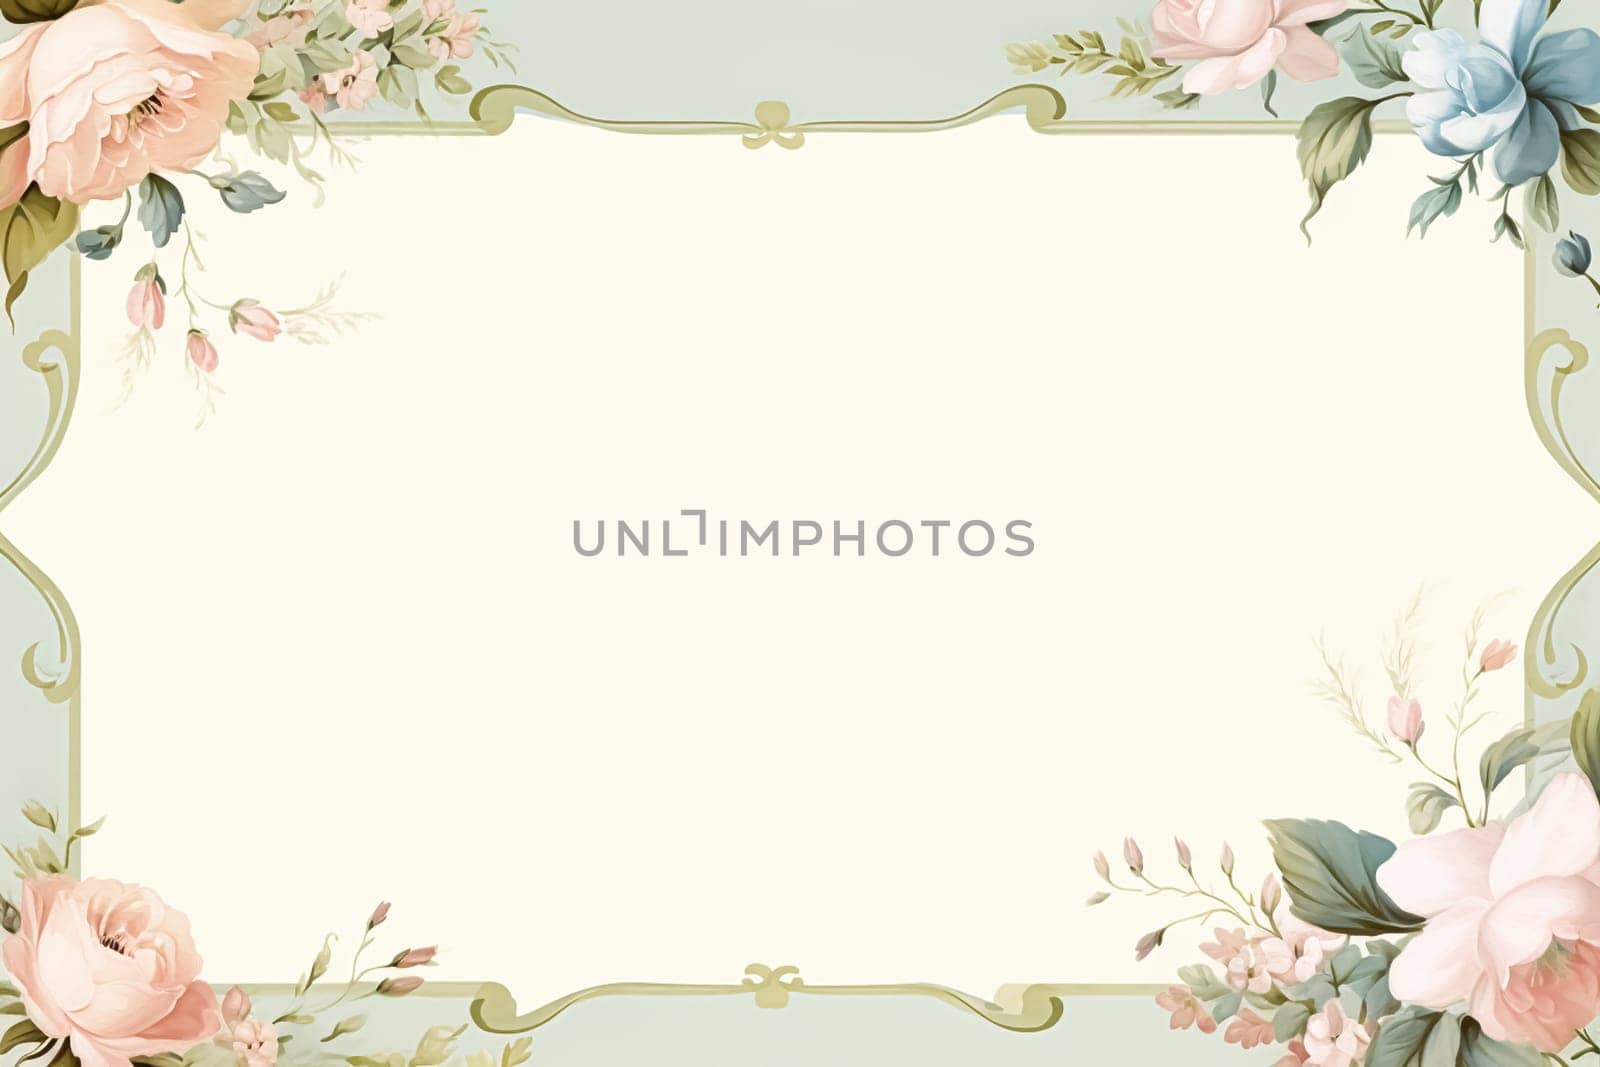 Blank vintage floral paper background for printable digital paper, art stationery and greeting card illustration by Anneleven